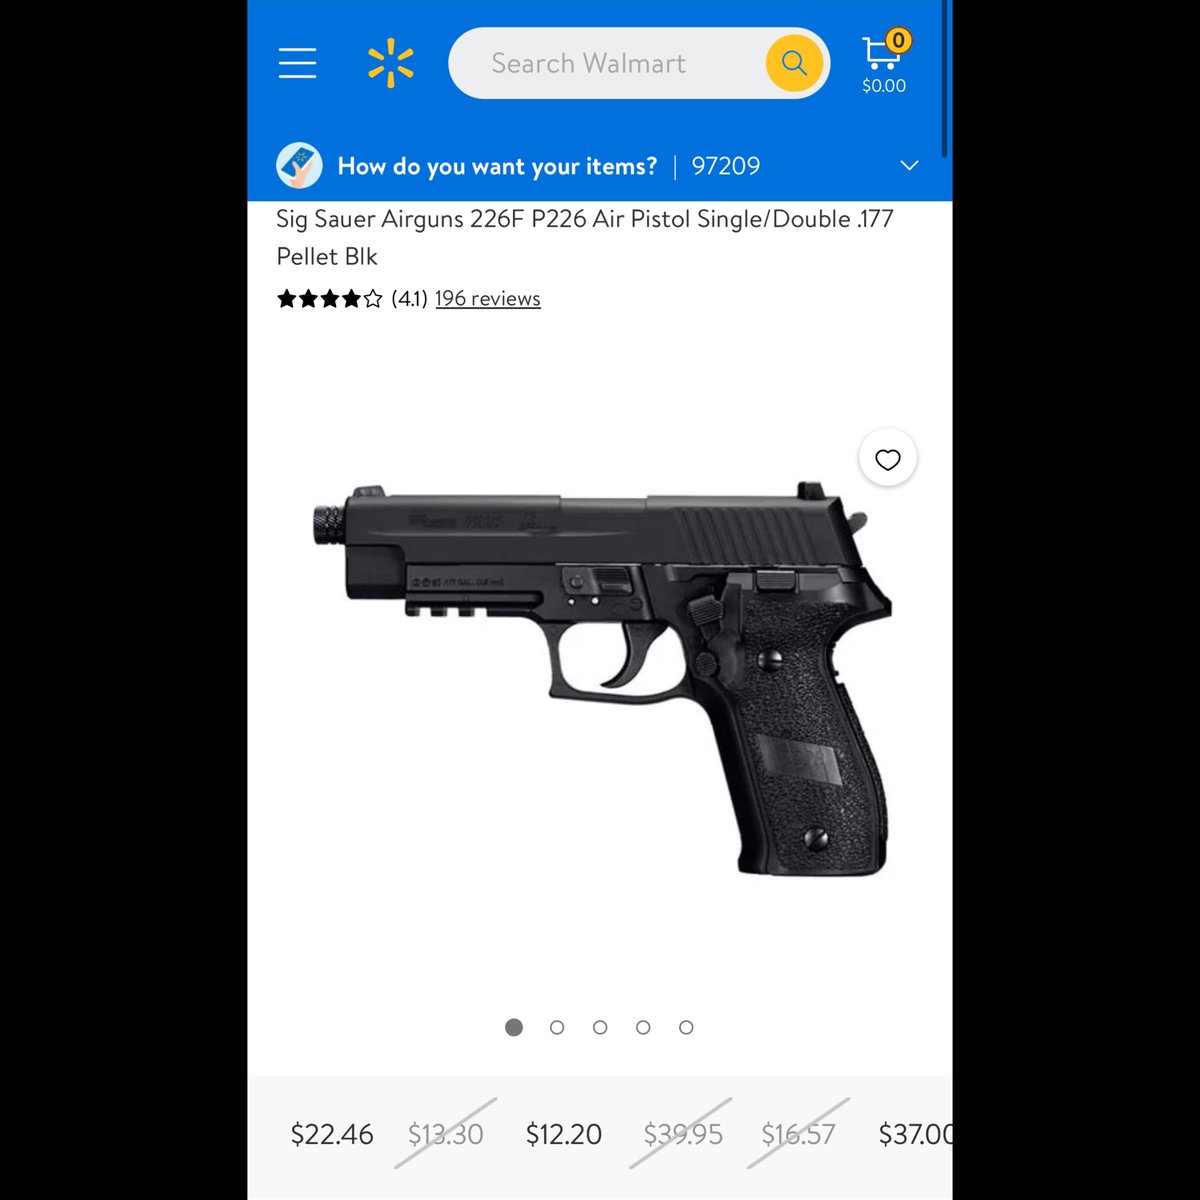 You can actually buy a handgun at Walmart for less than $25 dollars and they’ll ship it to you without a background check. Don’t tell me we don’t need stricter gun control laws!